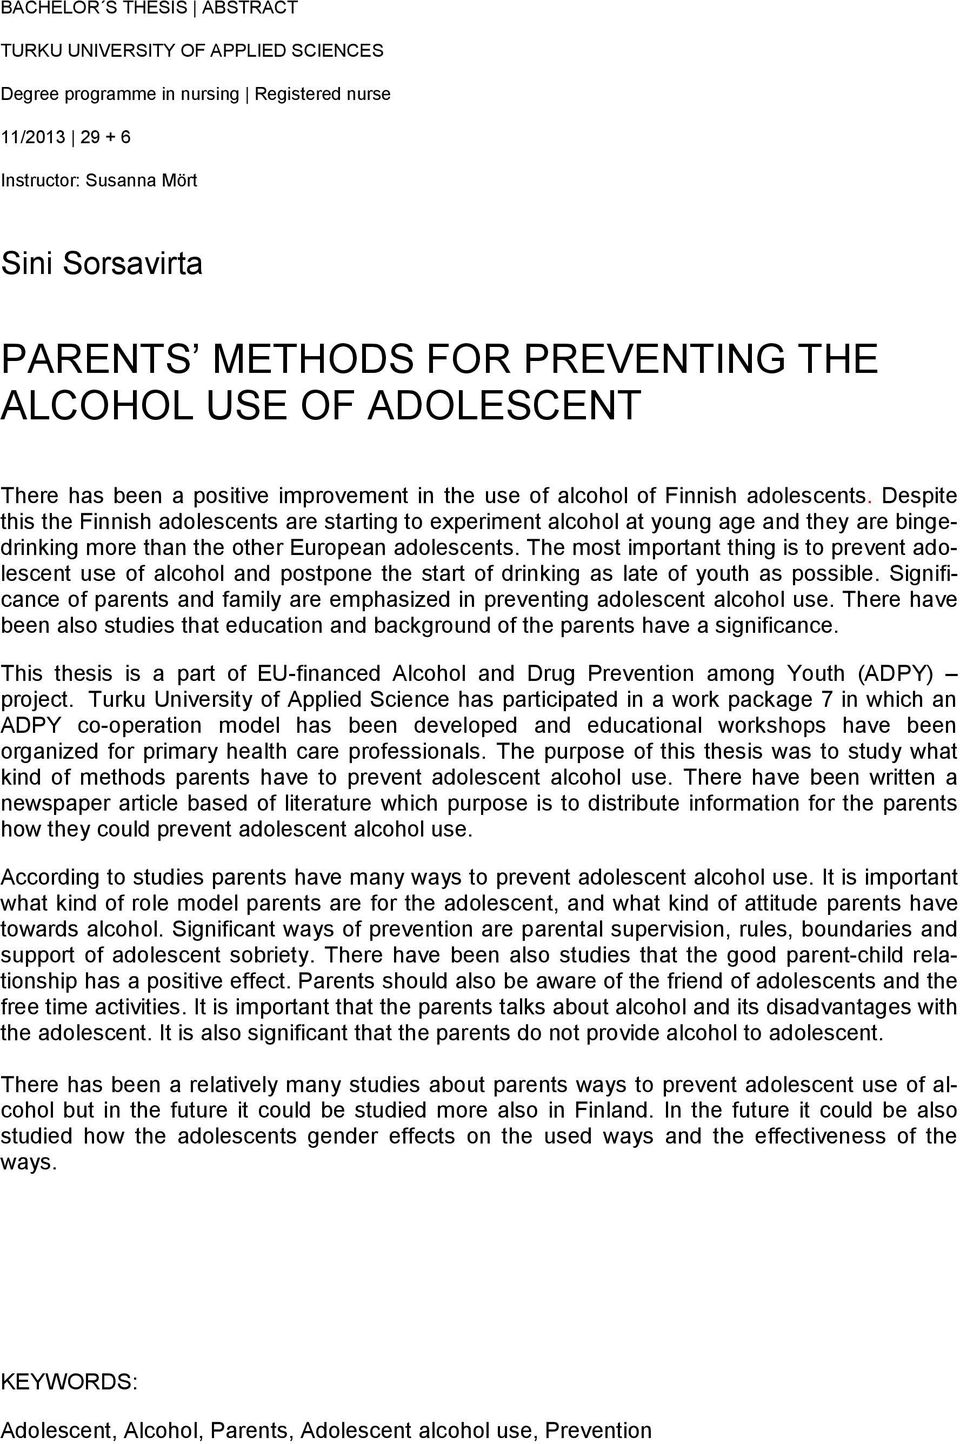 Despite this the Finnish adolescents are starting to experiment alcohol at young age and they are bingedrinking more than the other European adolescents.